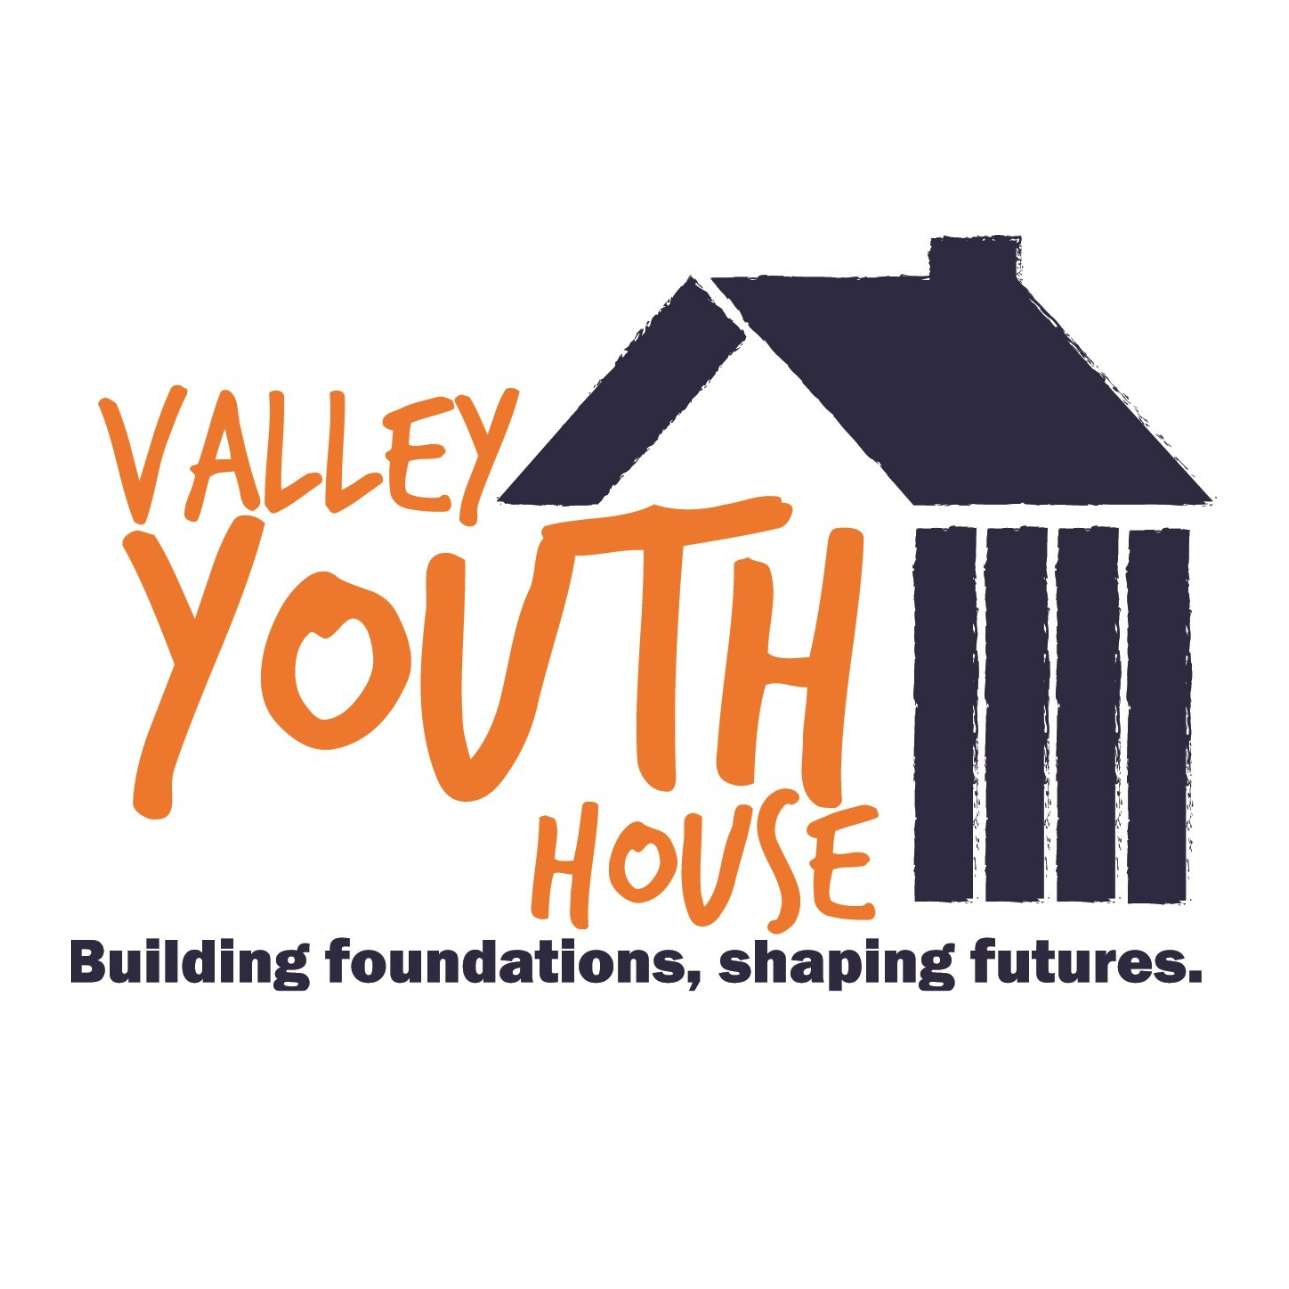 Gopuff Announces Employment Program in Partnership With Valley Youth House